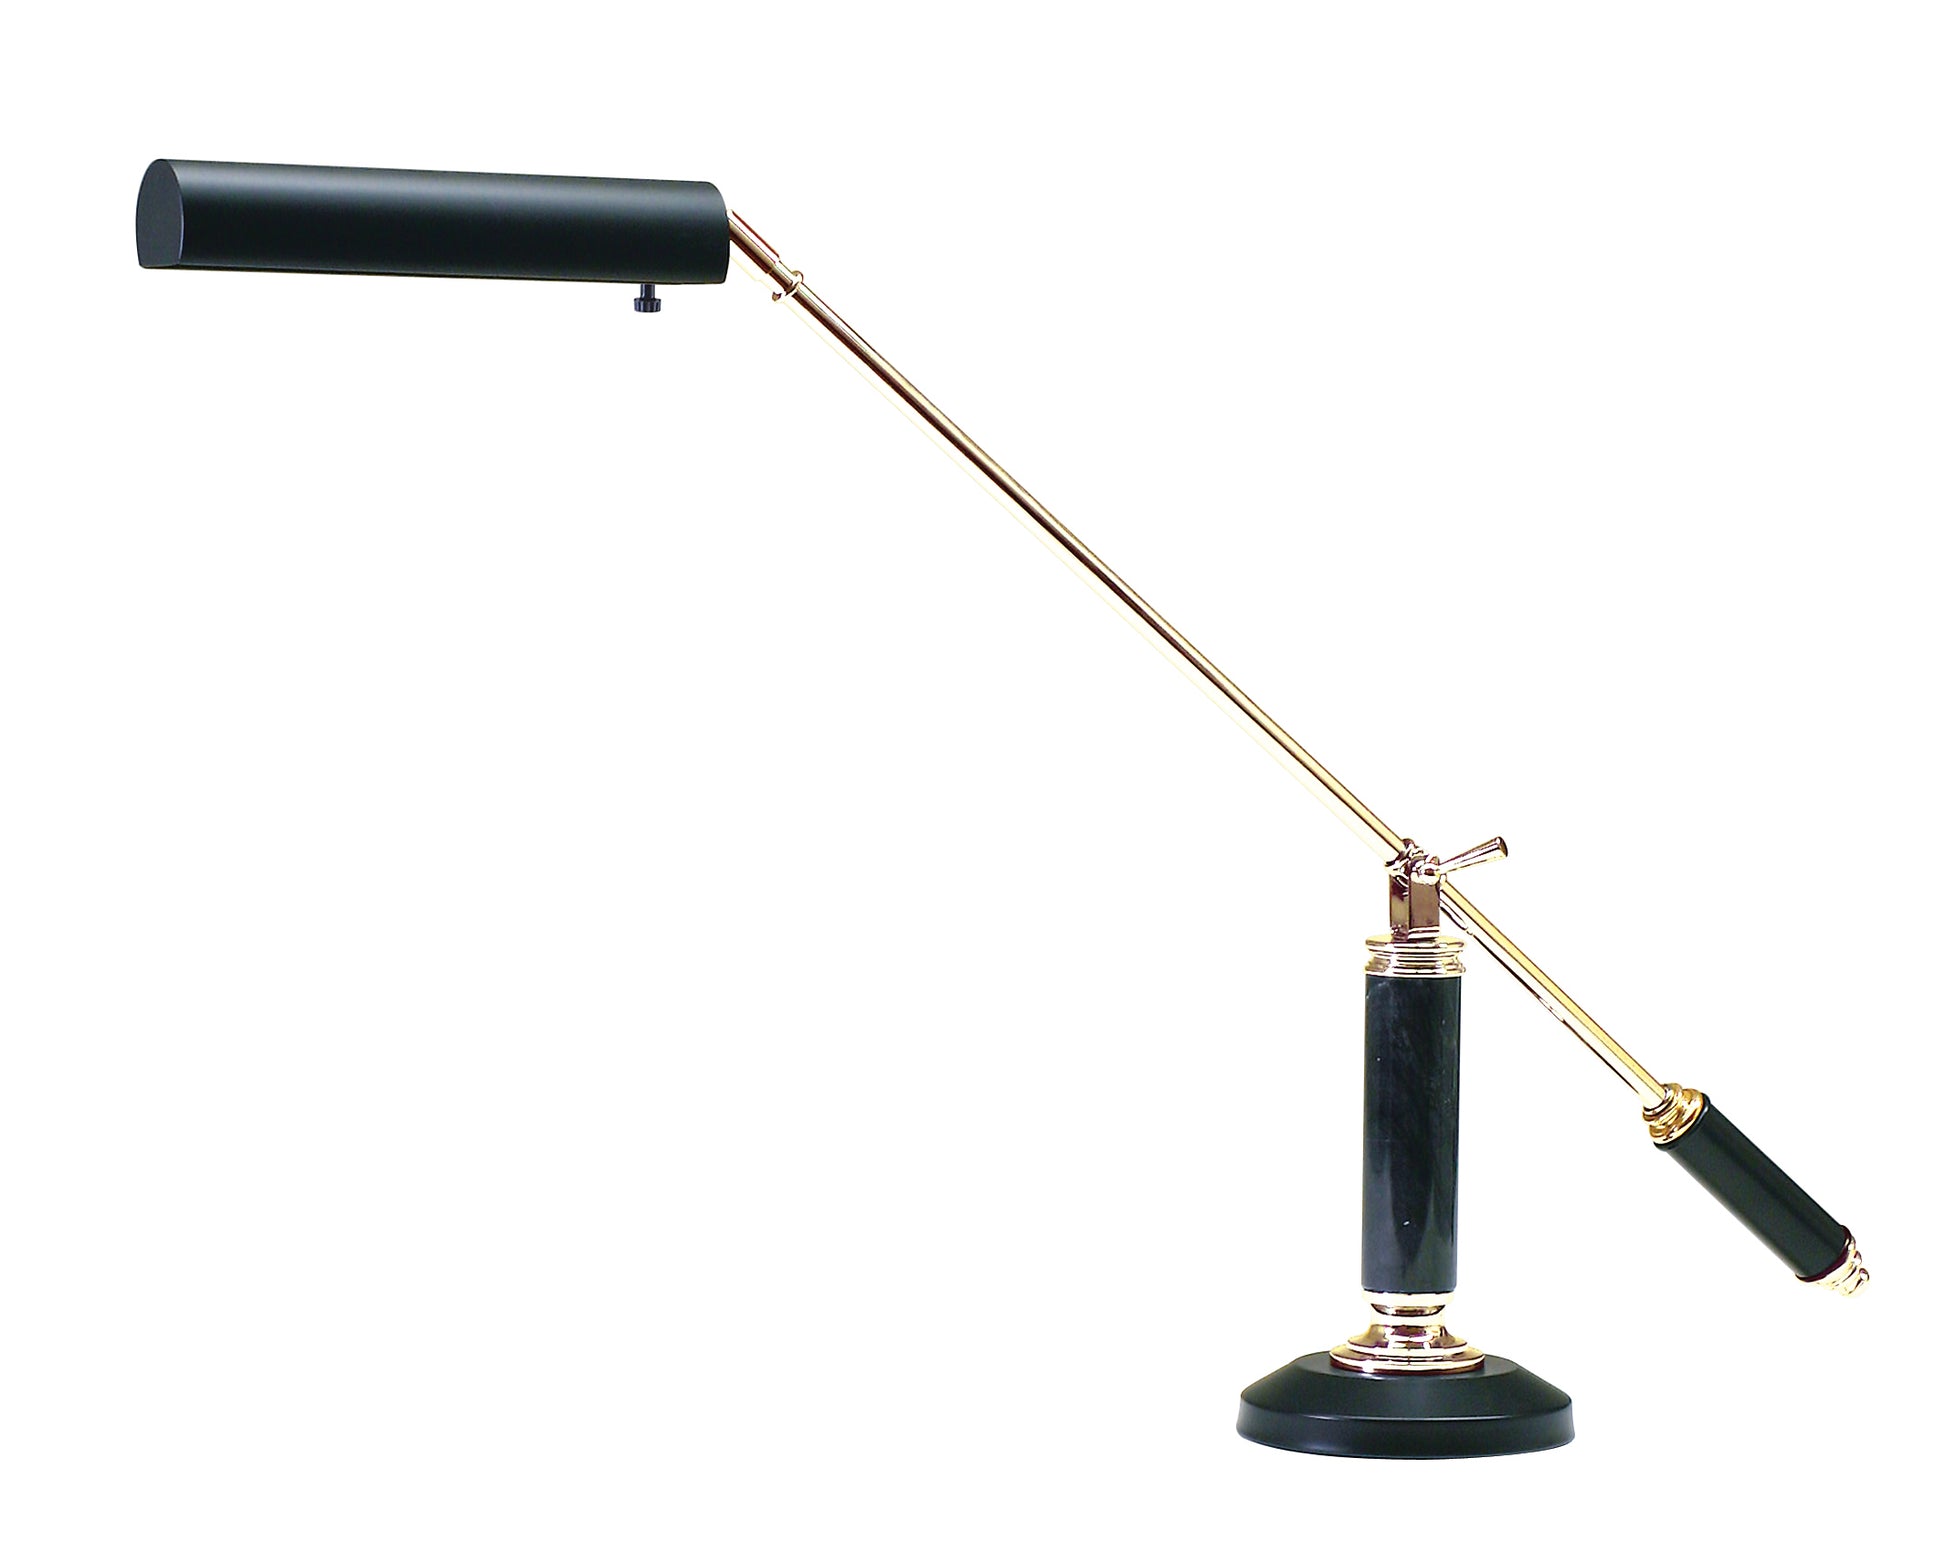 House of Troy Counter Balance Polished Brass and Black Marble Piano/Desk Lamp P10-192-617